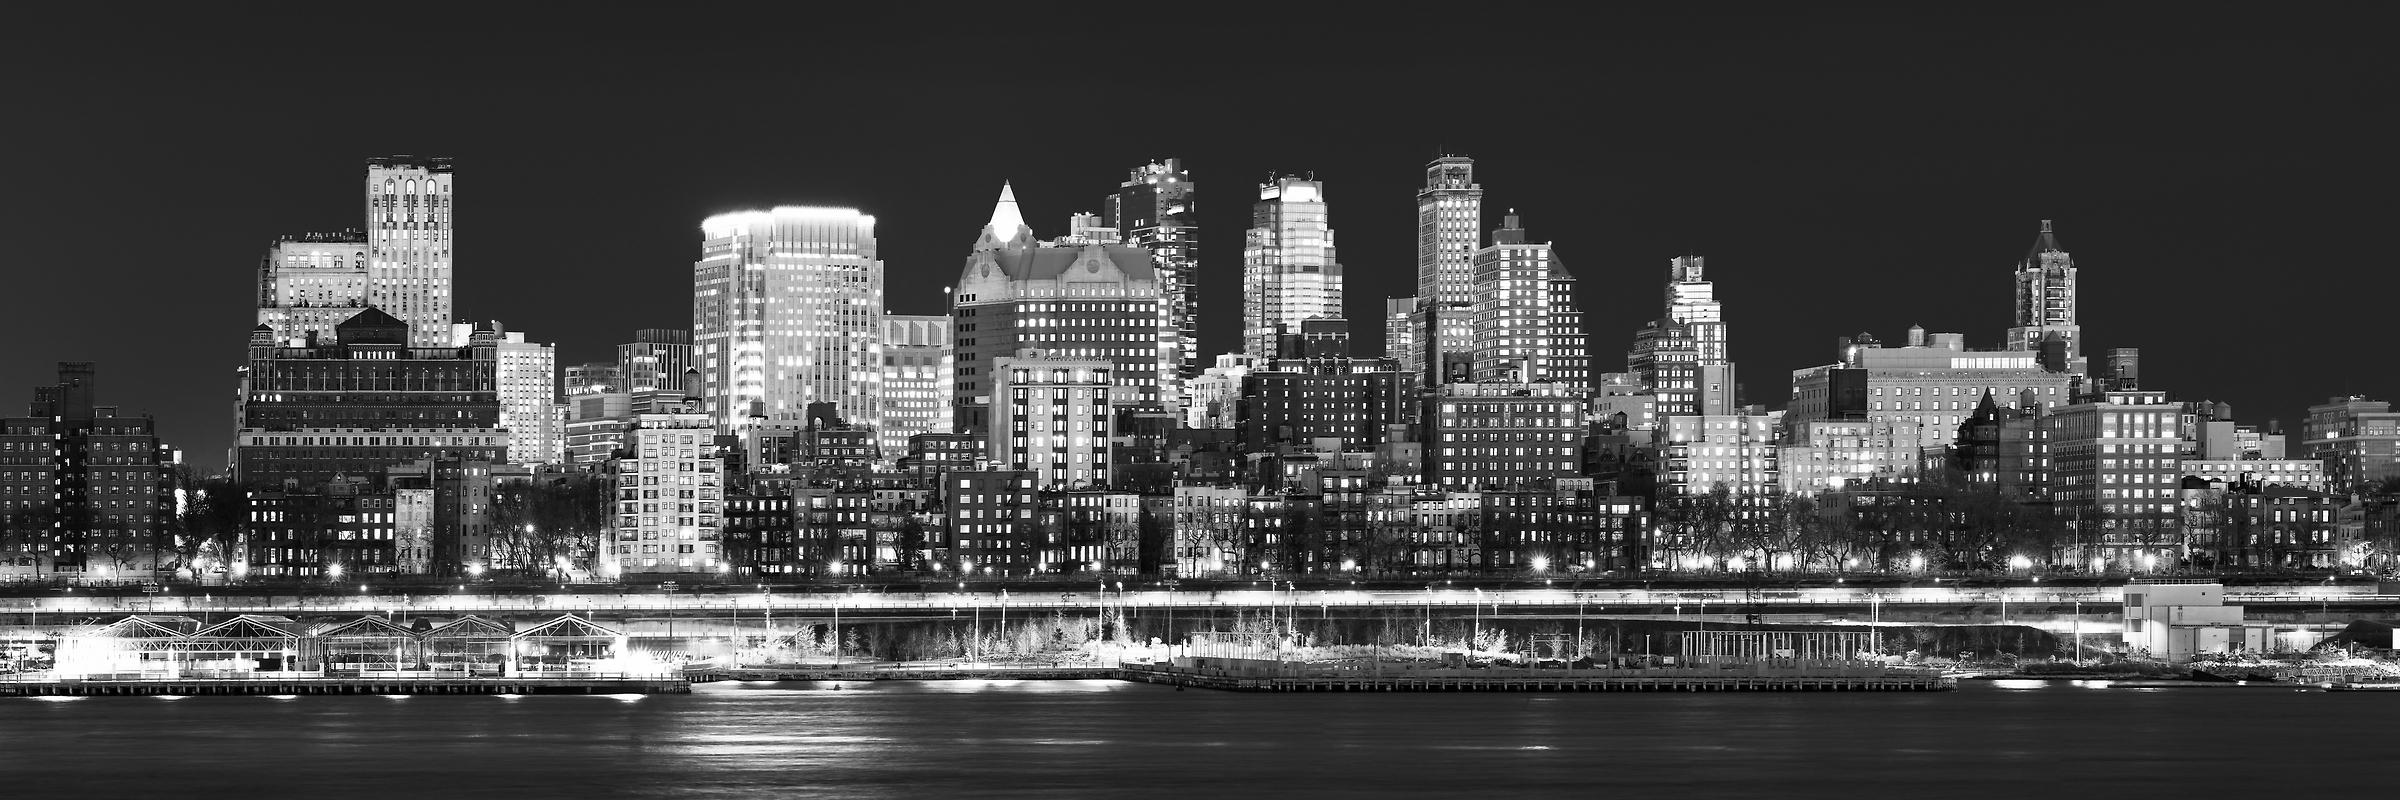 225 megapixels! A very high resolution, large-format VAST photo of the Downtown Brooklyn and Brooklyn Heights skyline at sunset dusk; fine art black and white cityscape photograph created by Dan Piech in New York City.